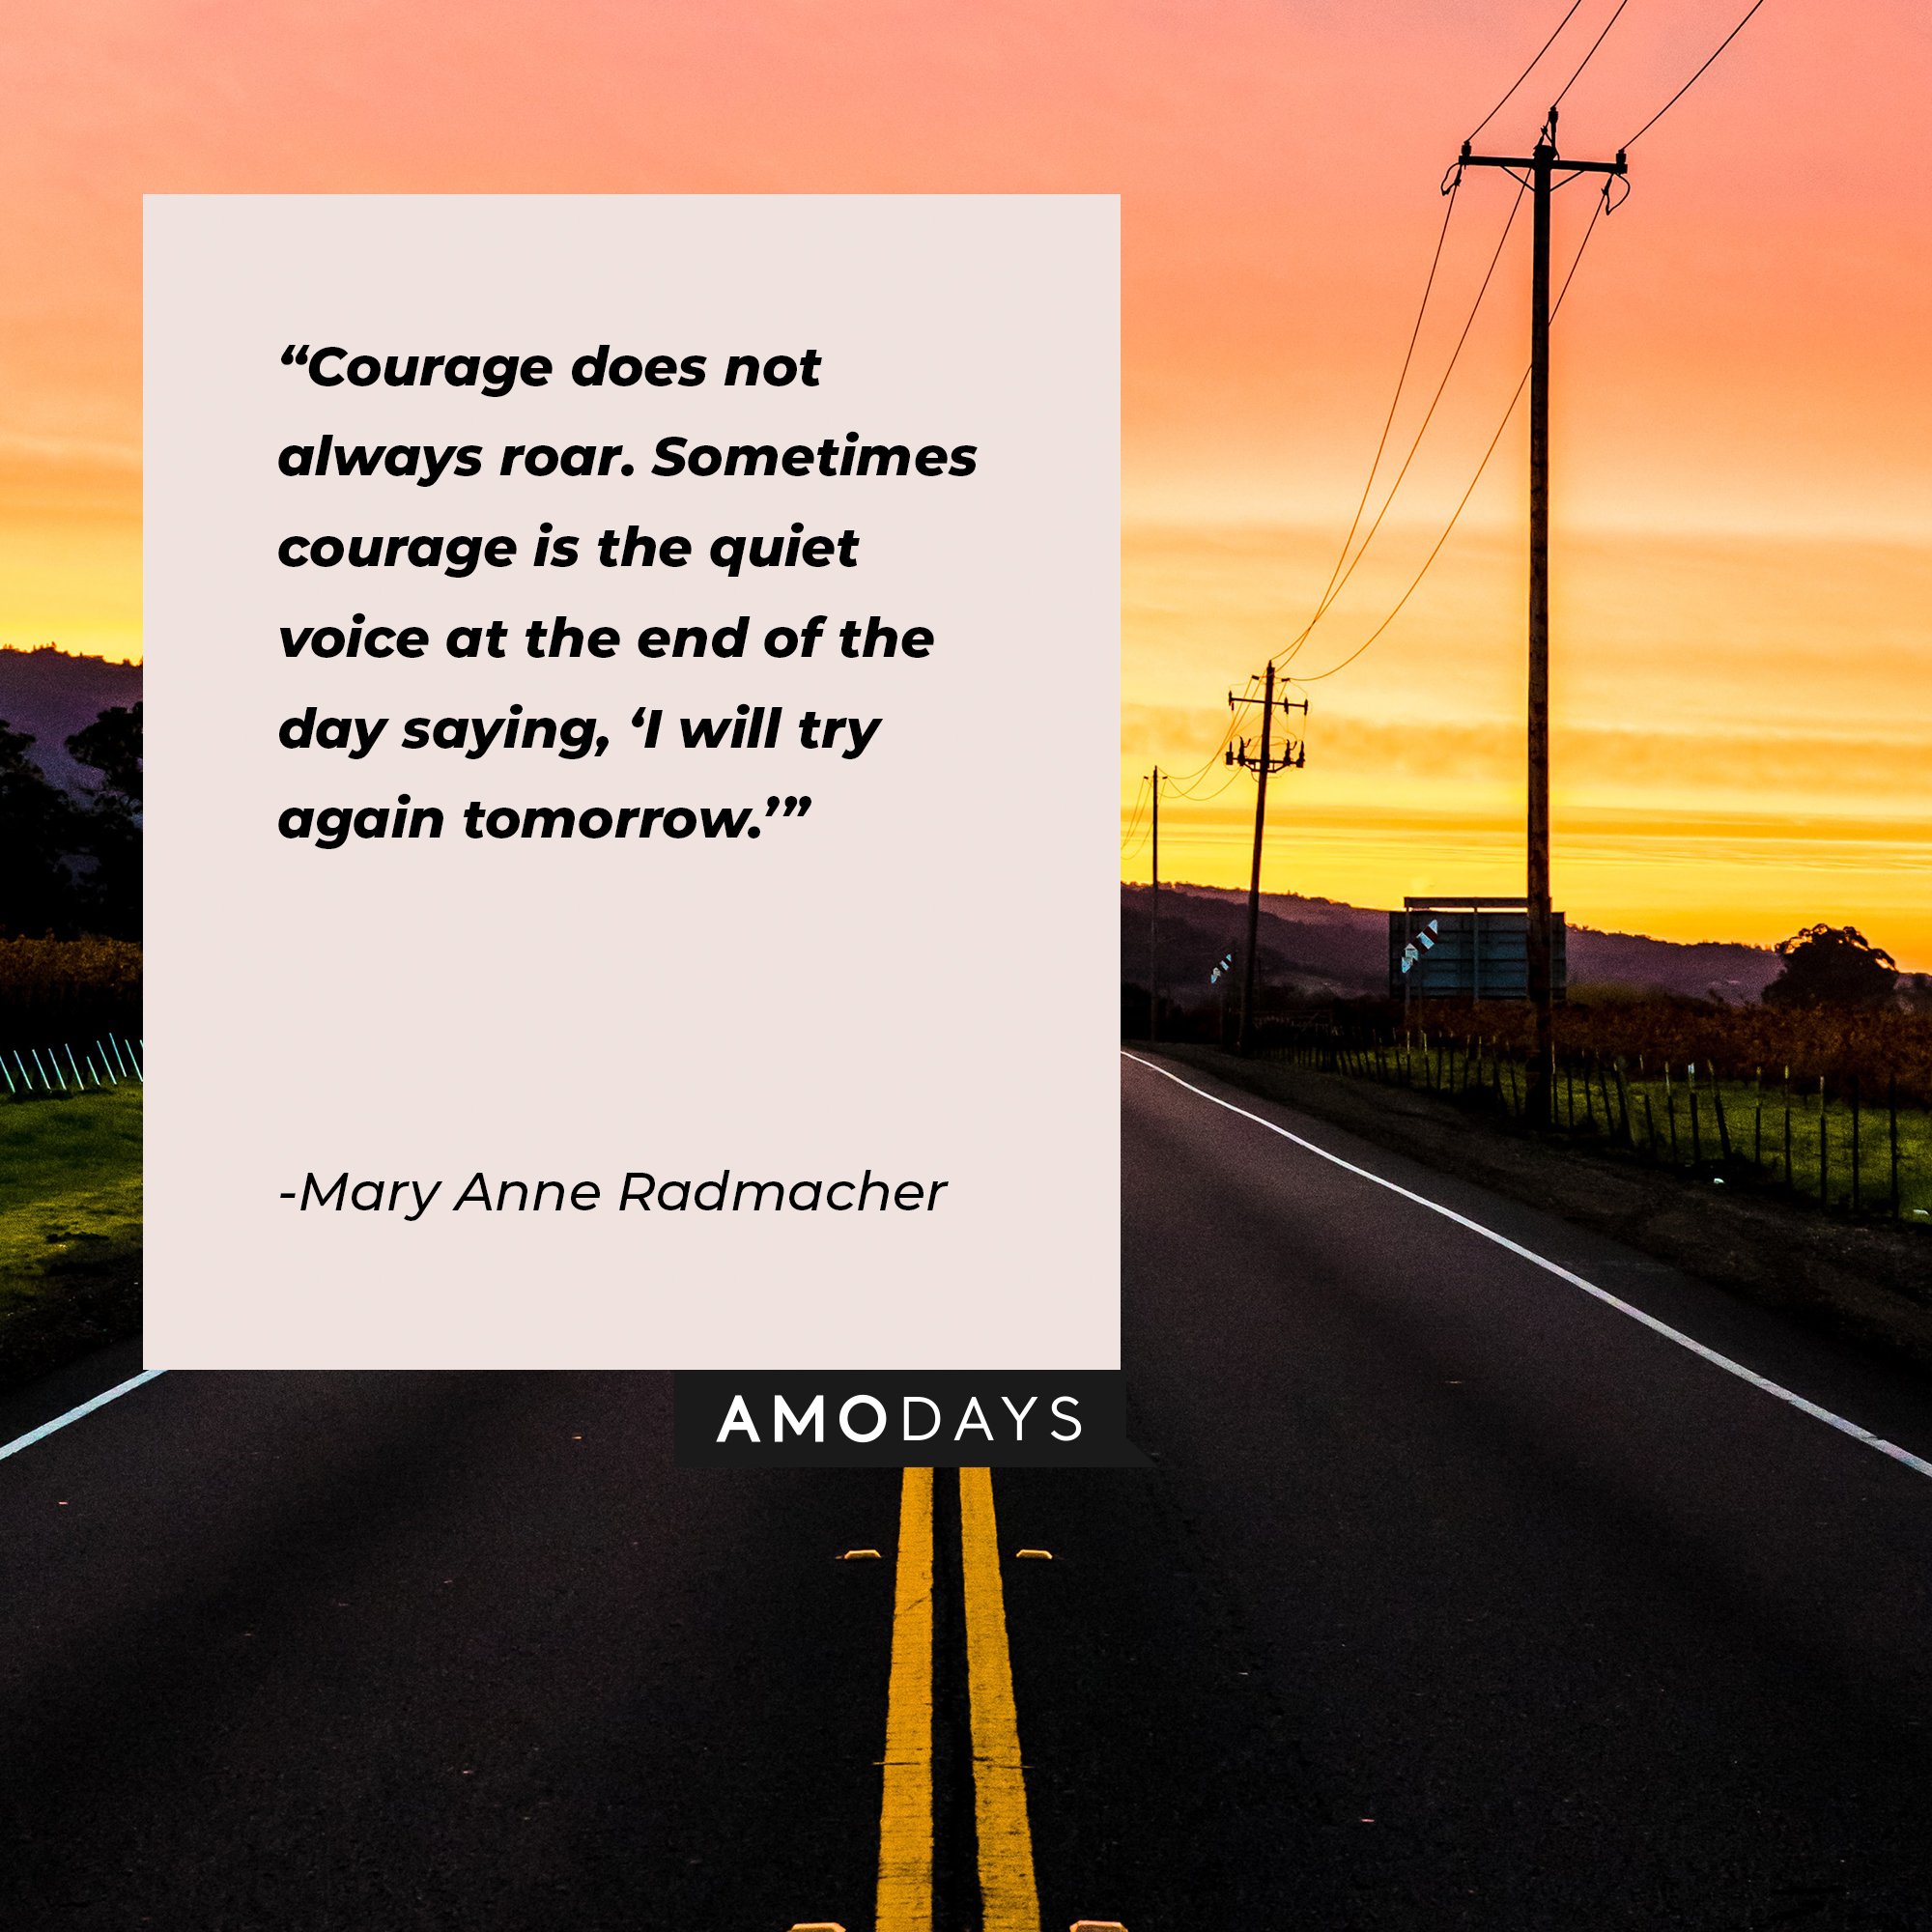 Mary Anne Radmacher’s quote: “Courage does not always roar. Sometimes courage is the quiet voice at the end of the day saying, 'I will try again tomorrow.’” | Image: AmoDays   